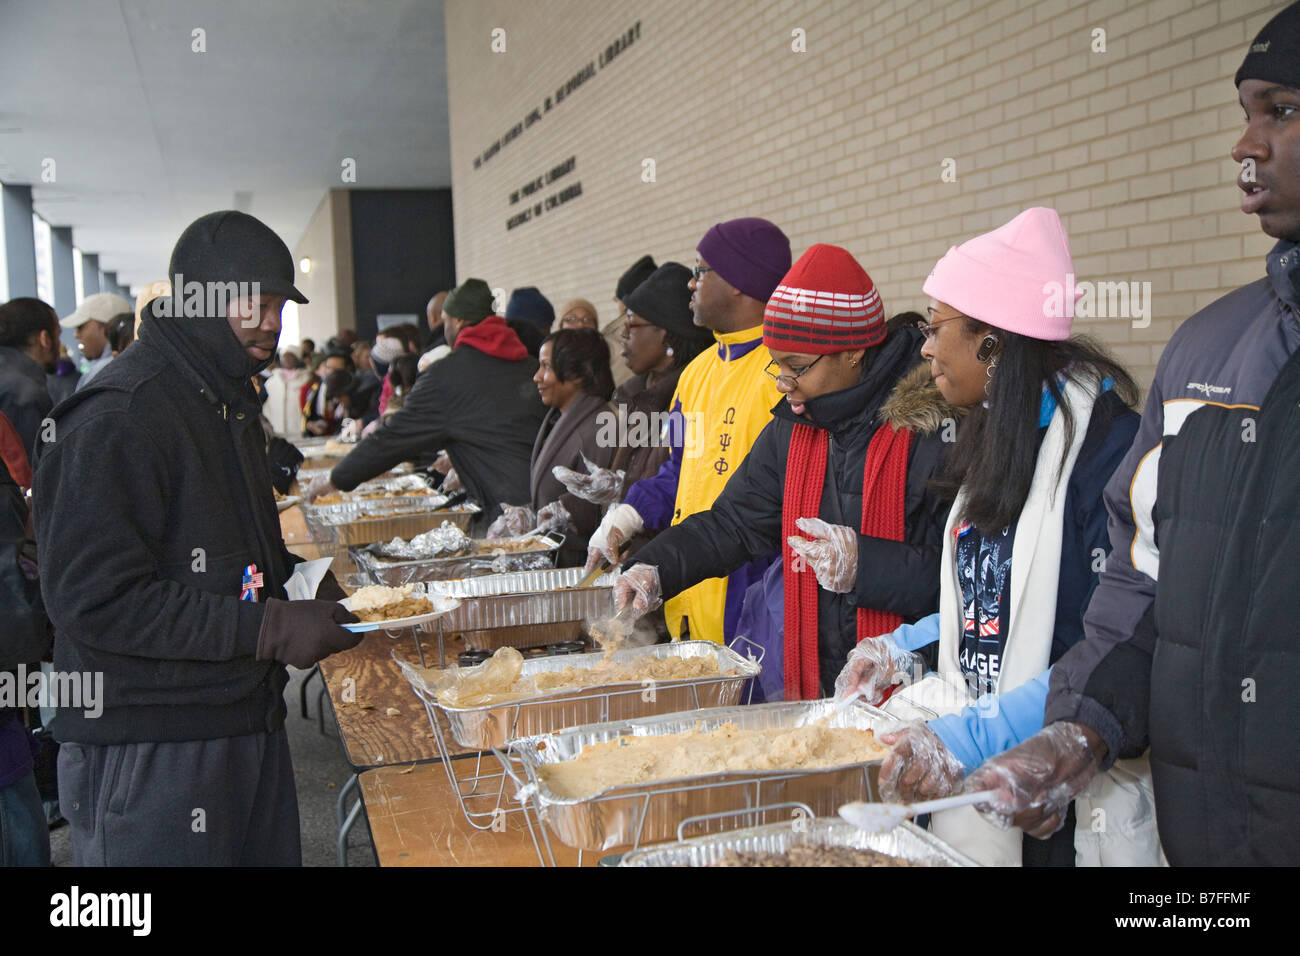 Volunteers Serve Meal To The Homeless At Outdoor Soup Kitchen B7FFMF 